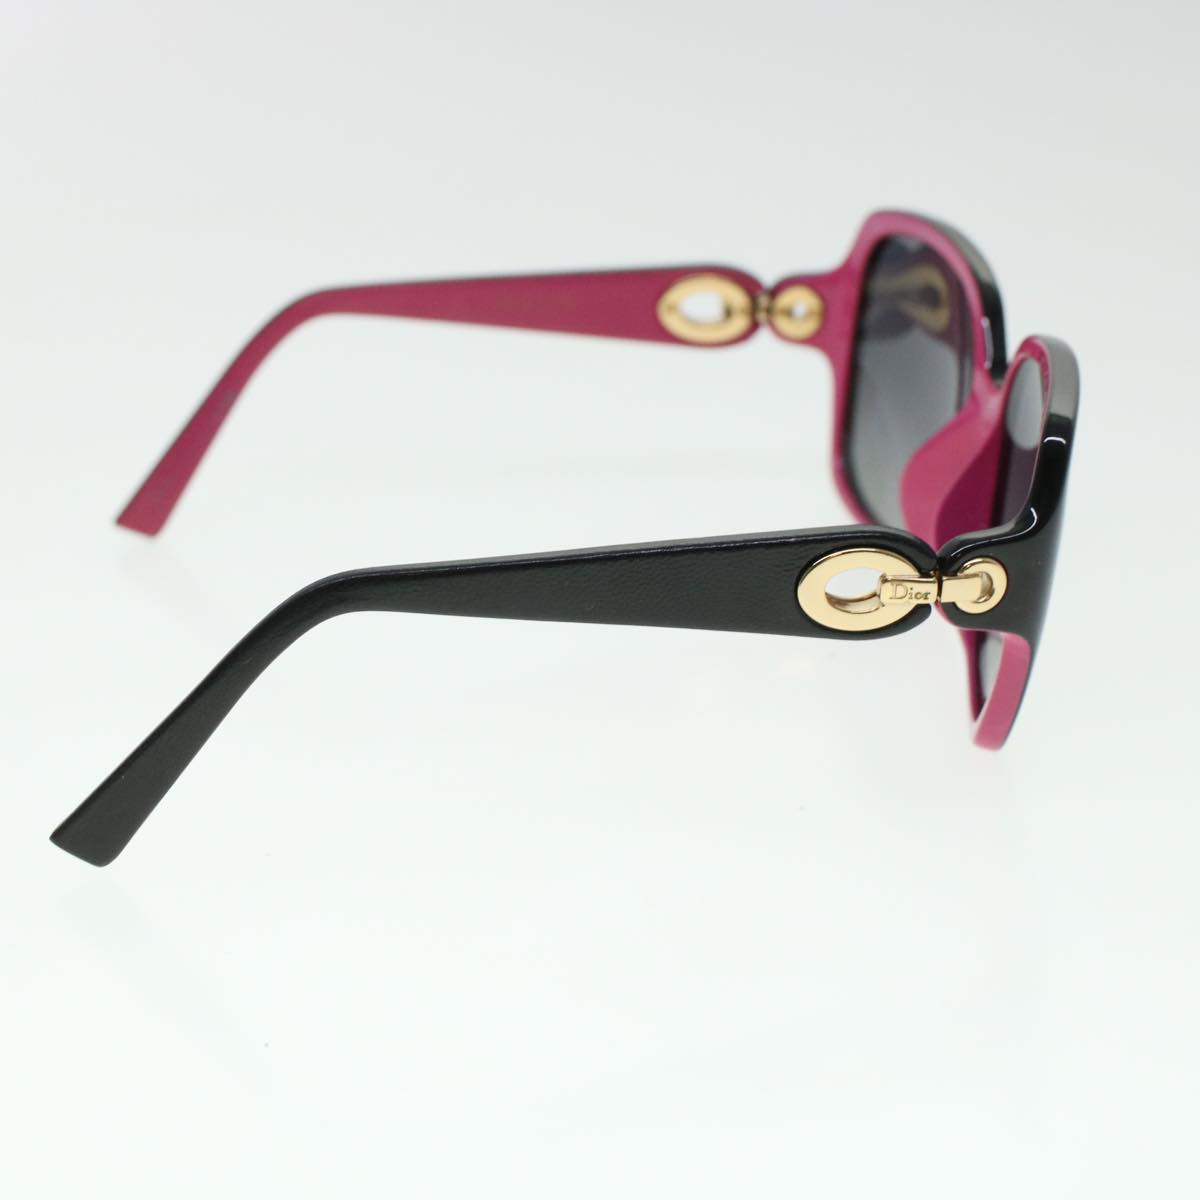 Christian Dior Sunglasses Black Pink Auth cl607